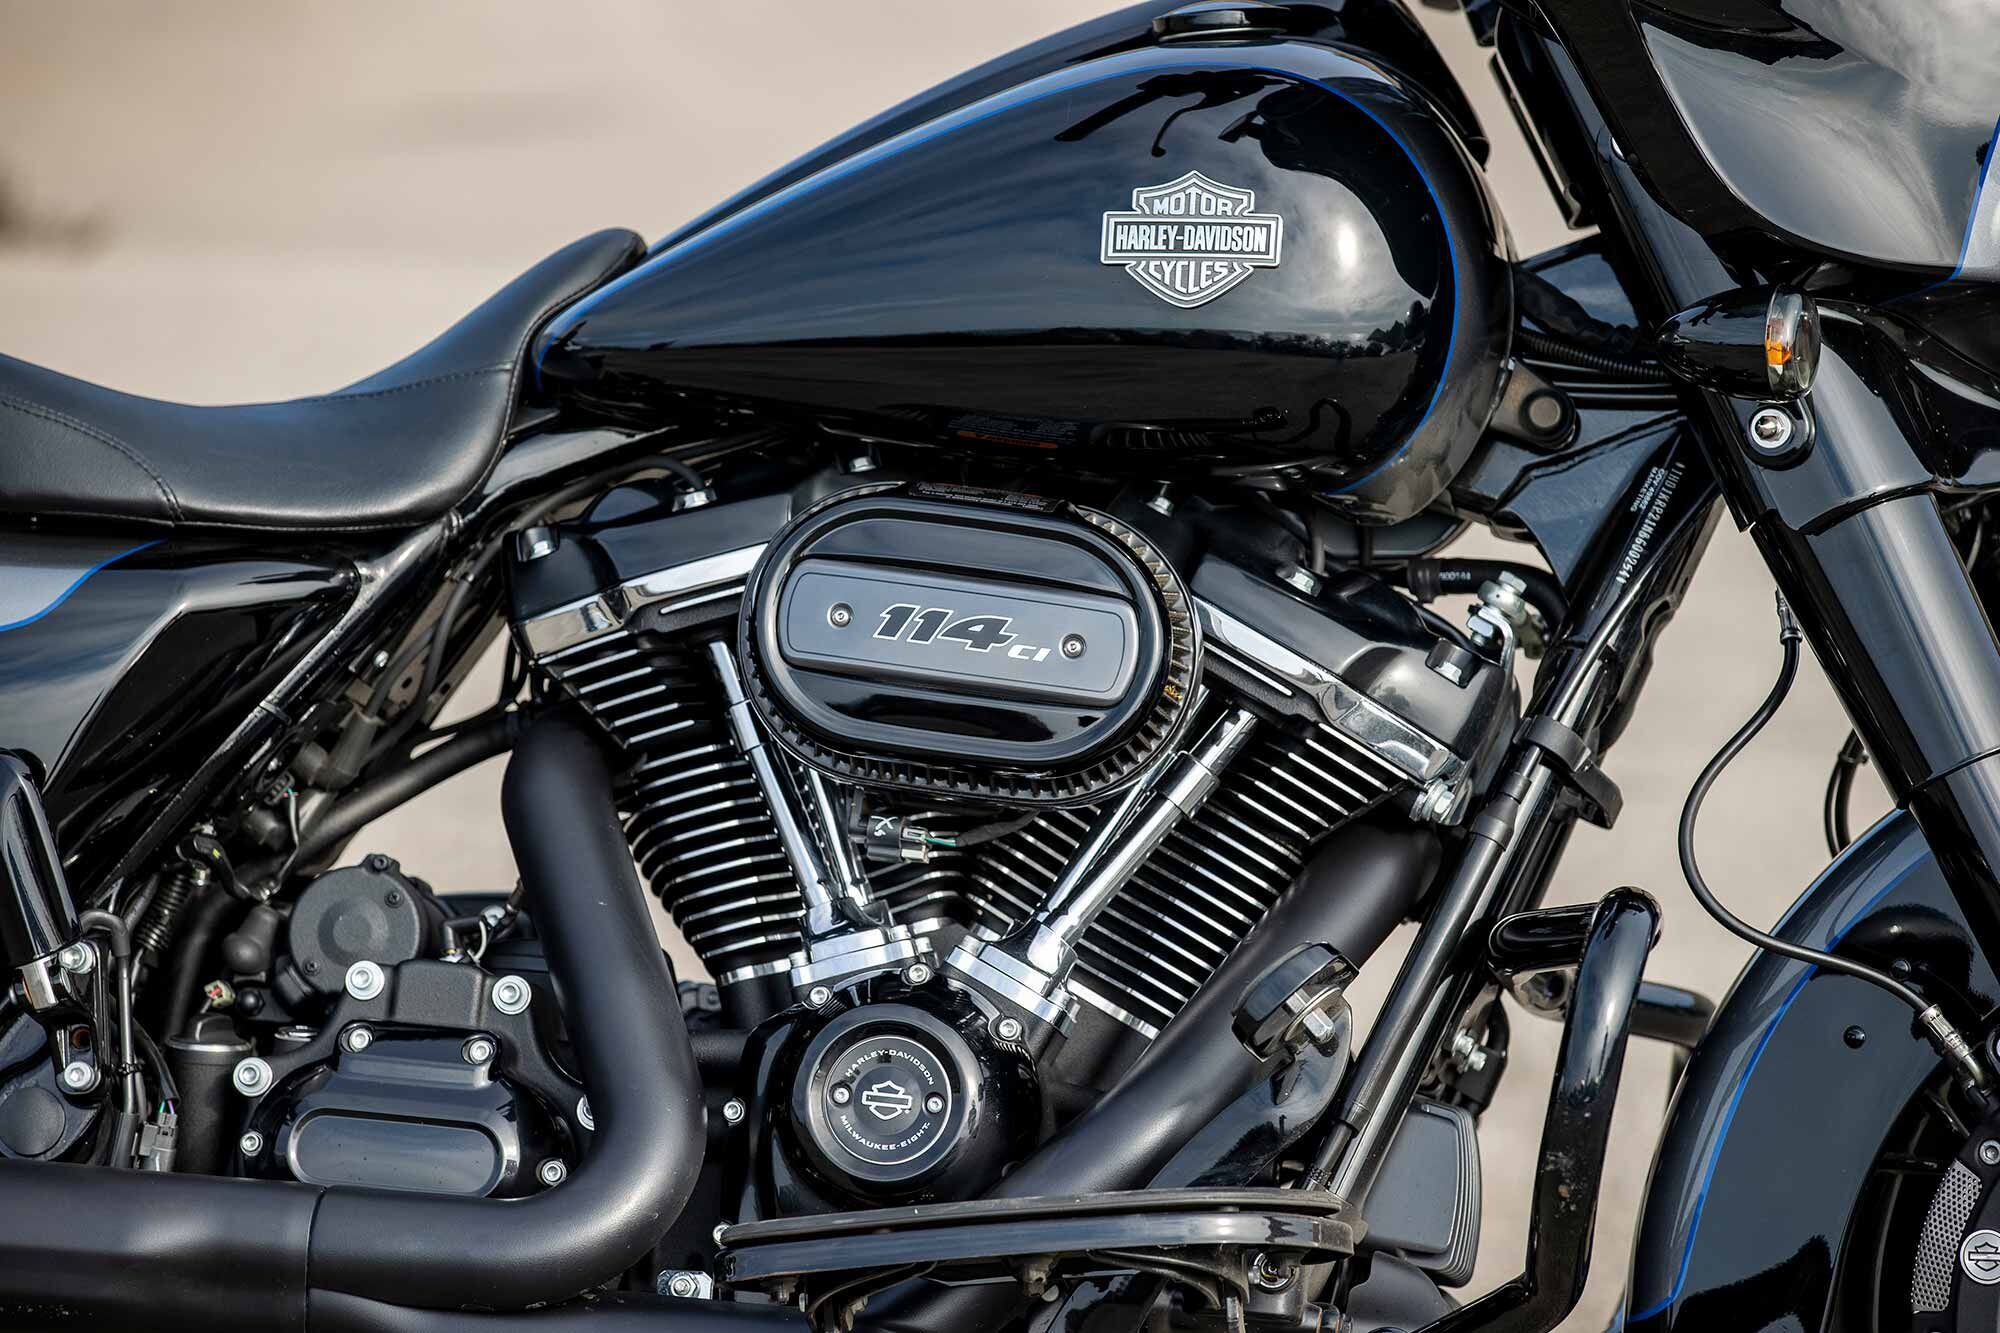 H-D styling balances black and chrome finishes in the Milwaukee-Eight’s updated but classic form.